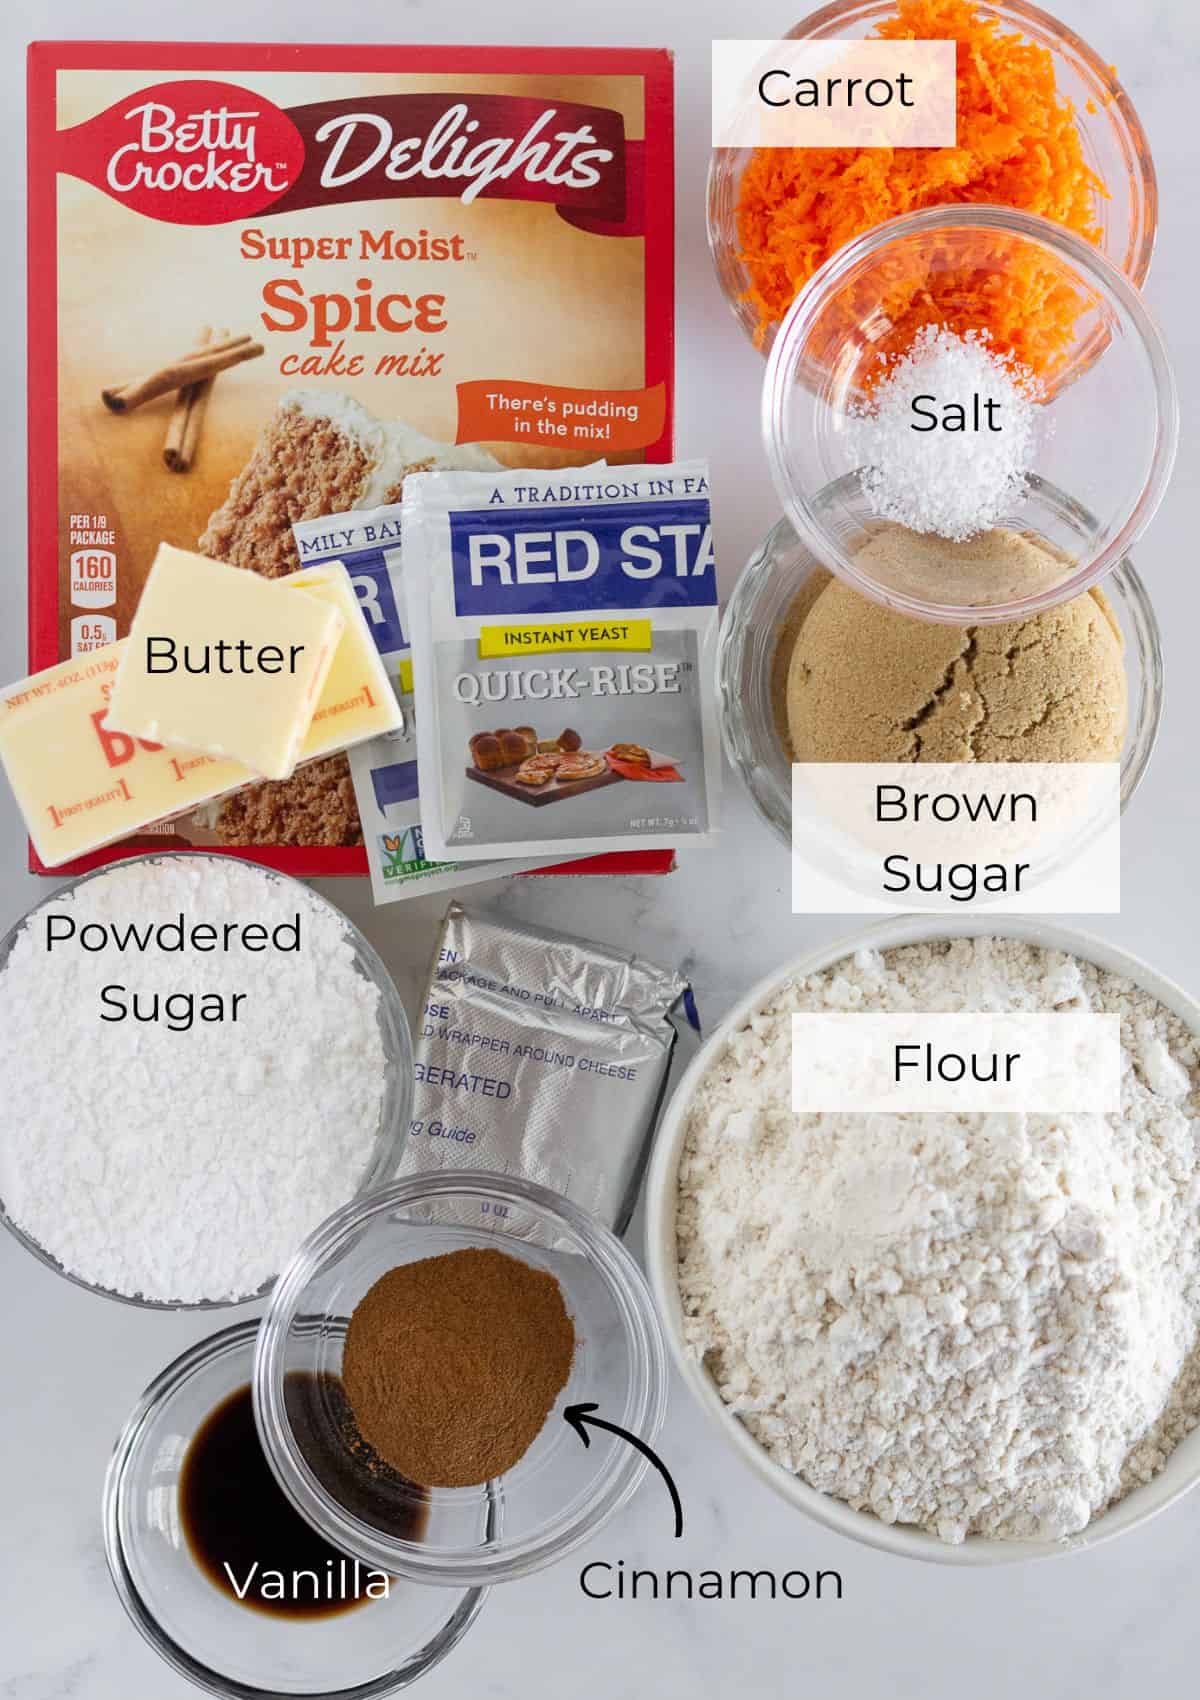 The ingredients needed to make carrot cake cinnamon rolls.